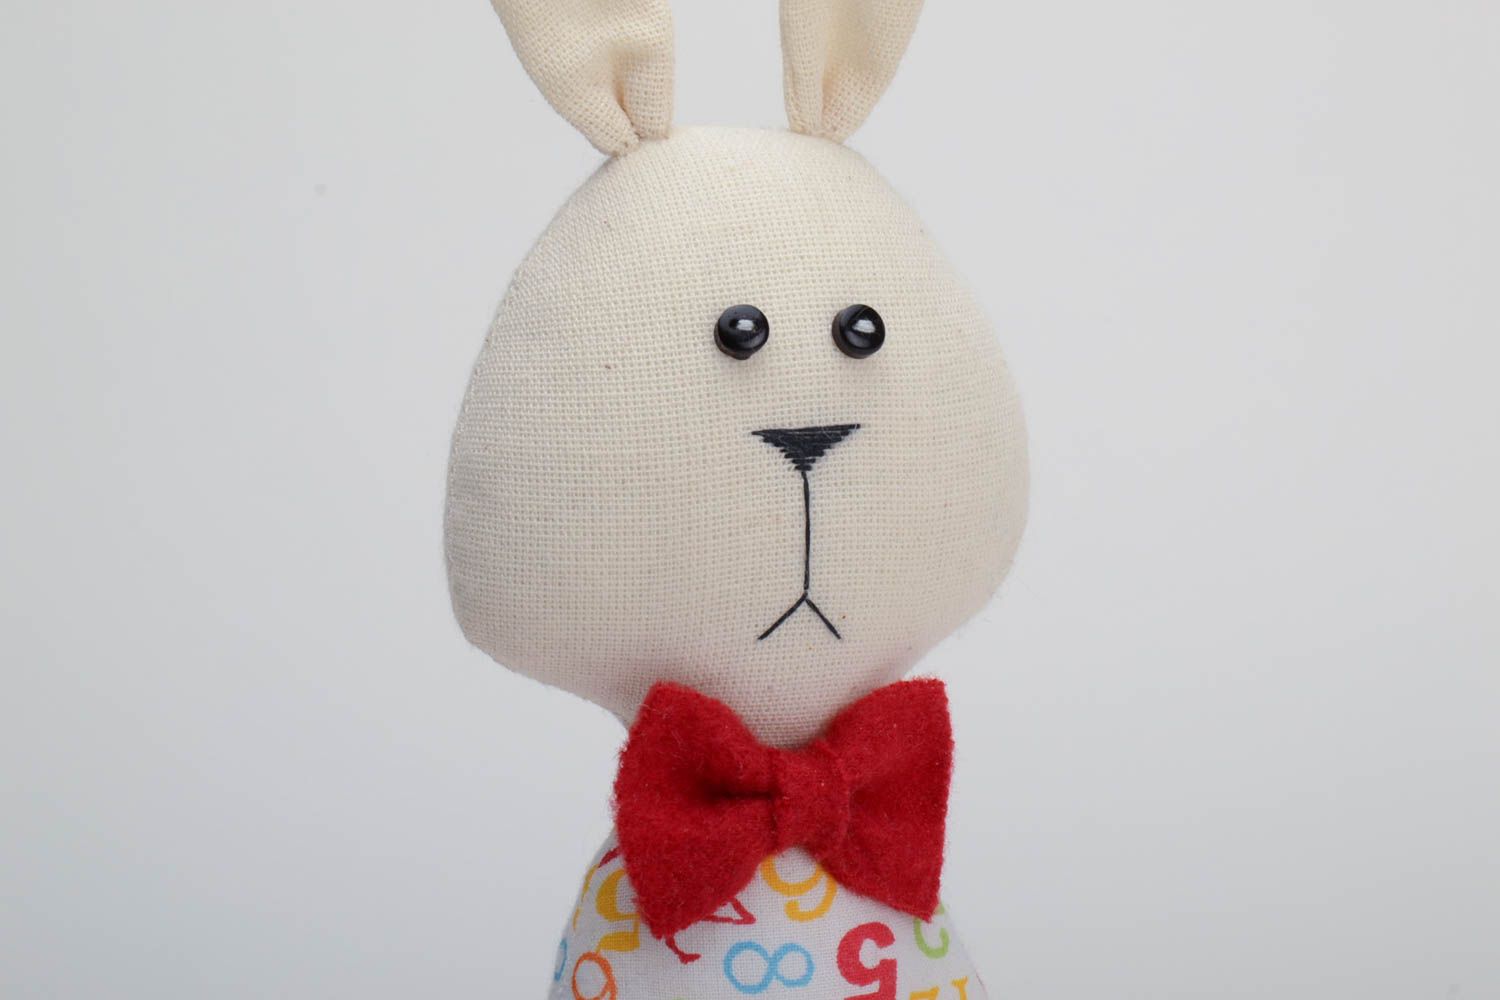 Handmade small cotton soft toy rabbit boy in striped trousers with red bow tie photo 3